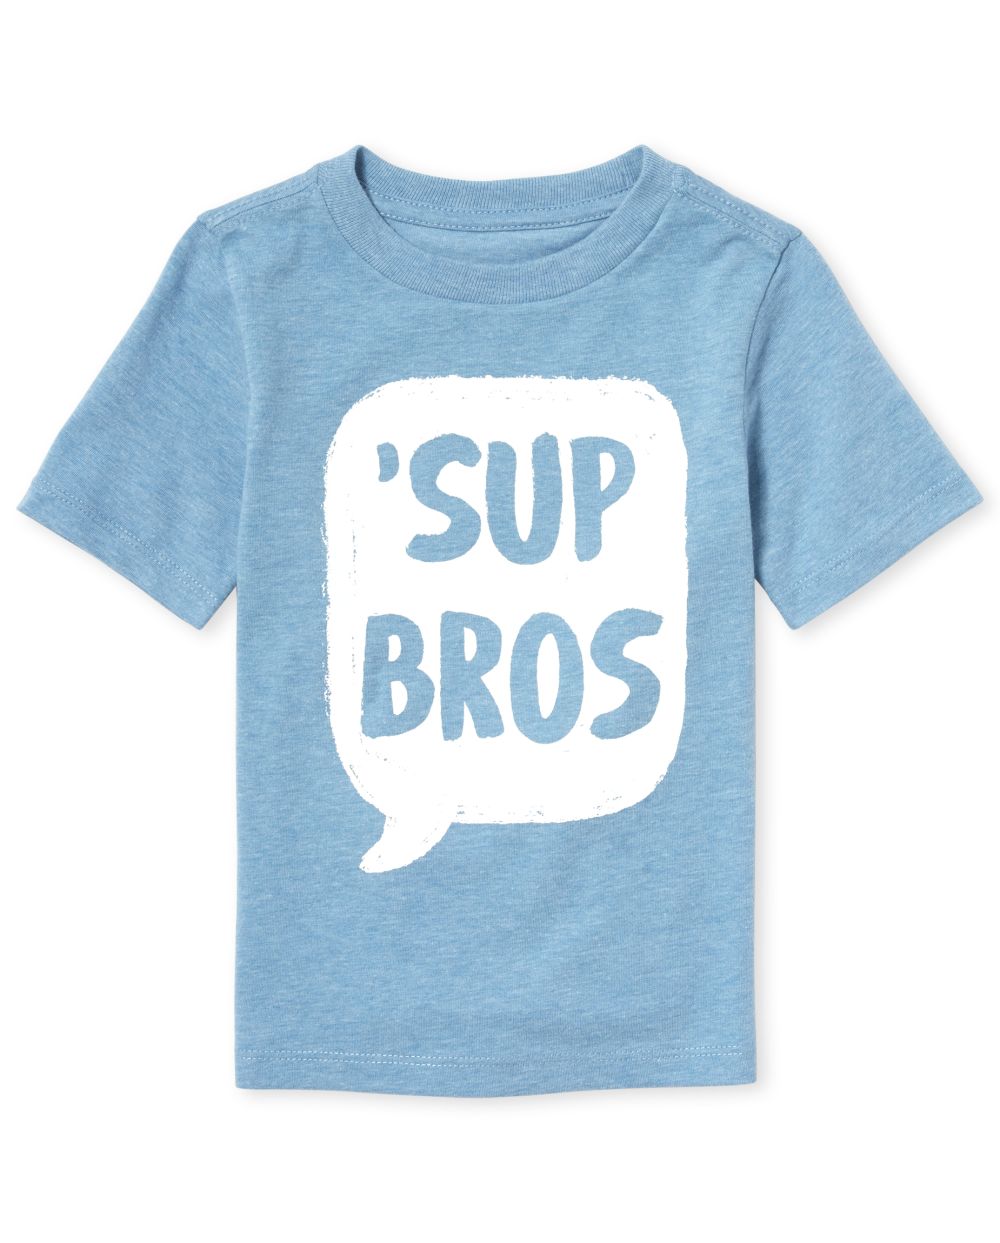 Baby And Toddler Boys Short Sleeve 'Sup Bros' Graphic Tee